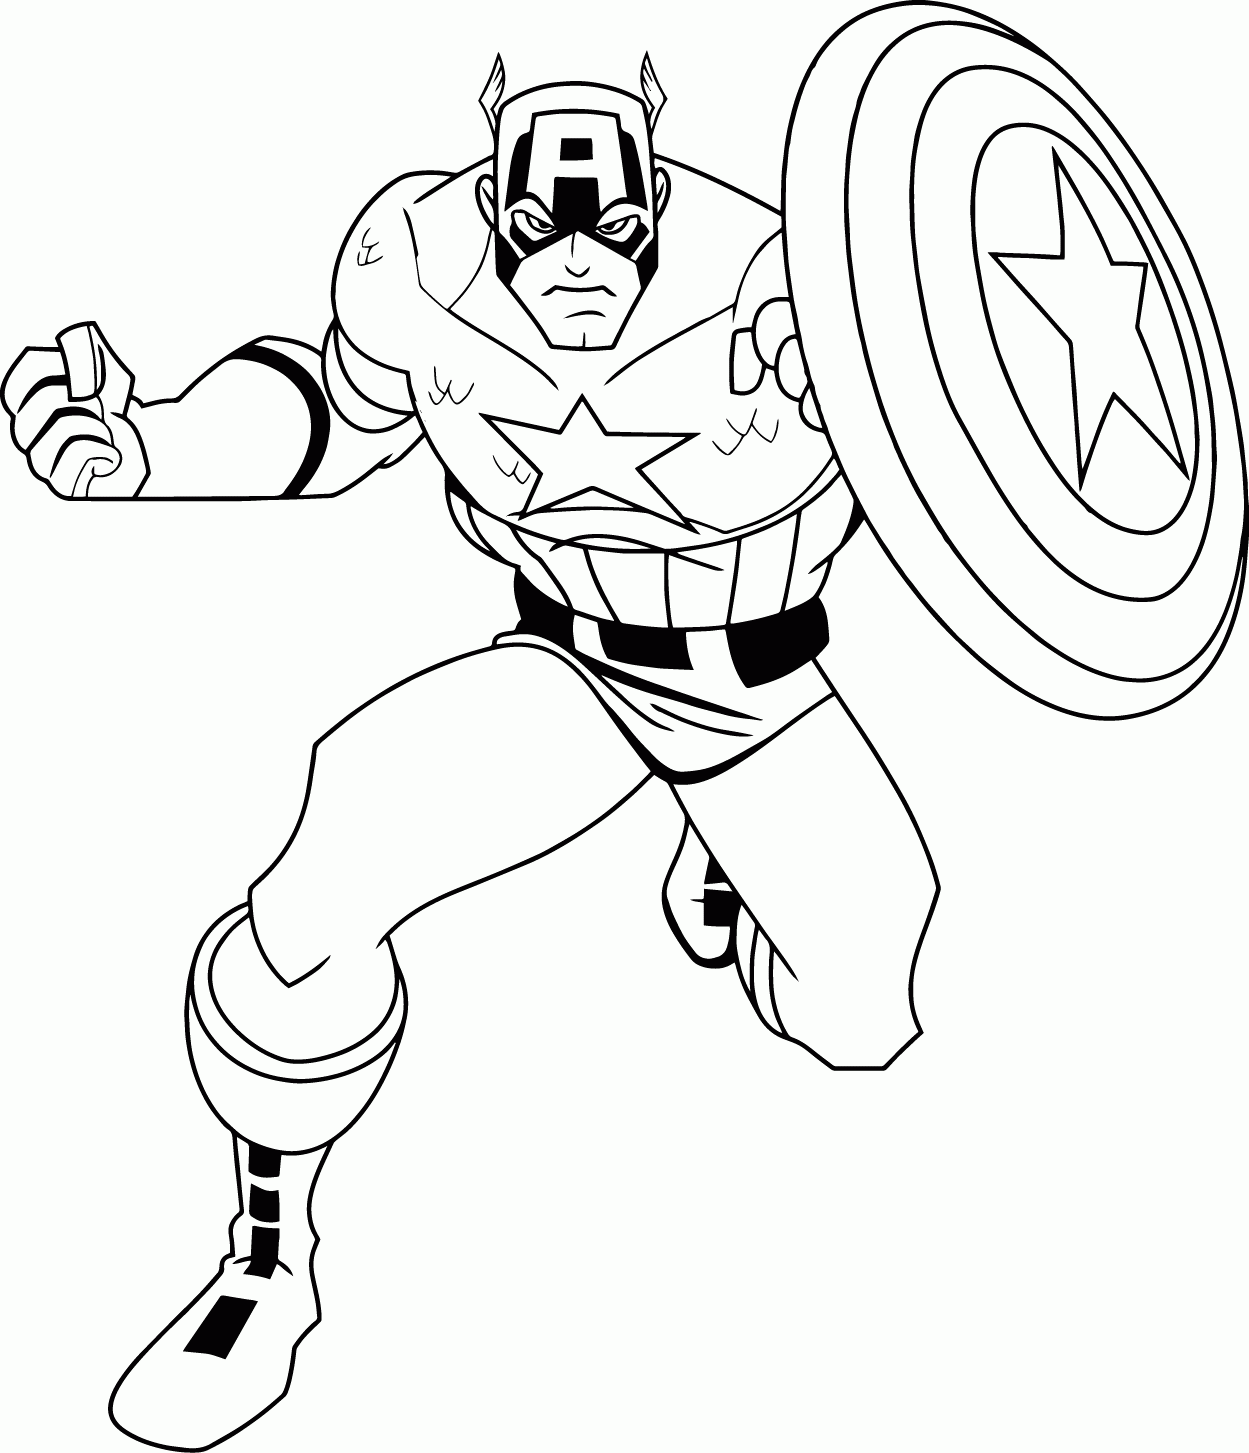 Free Avengers Captain America Coloring Pages, Download Free Avengers ...